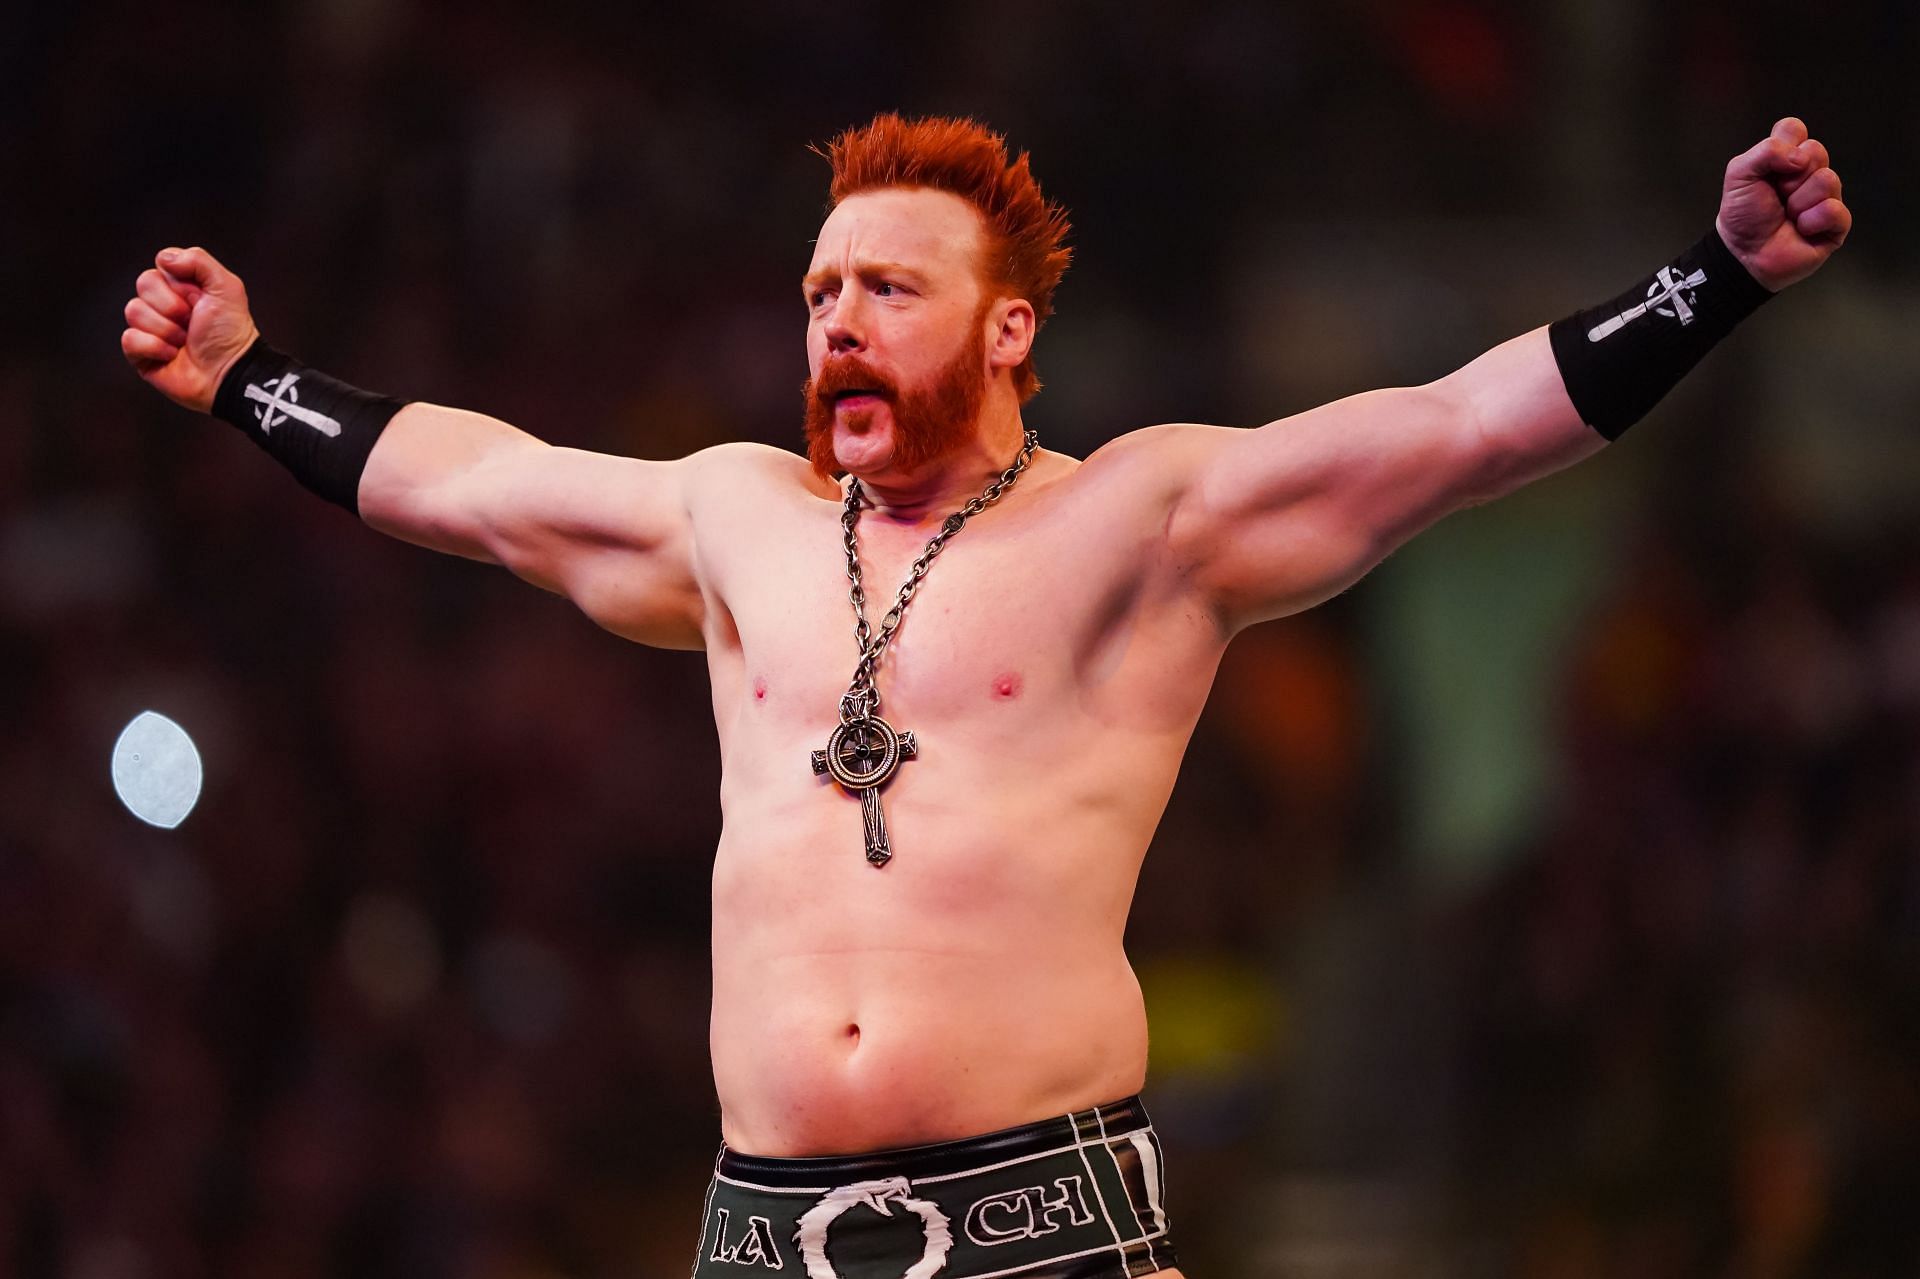 Sheamus is a four-time world champion